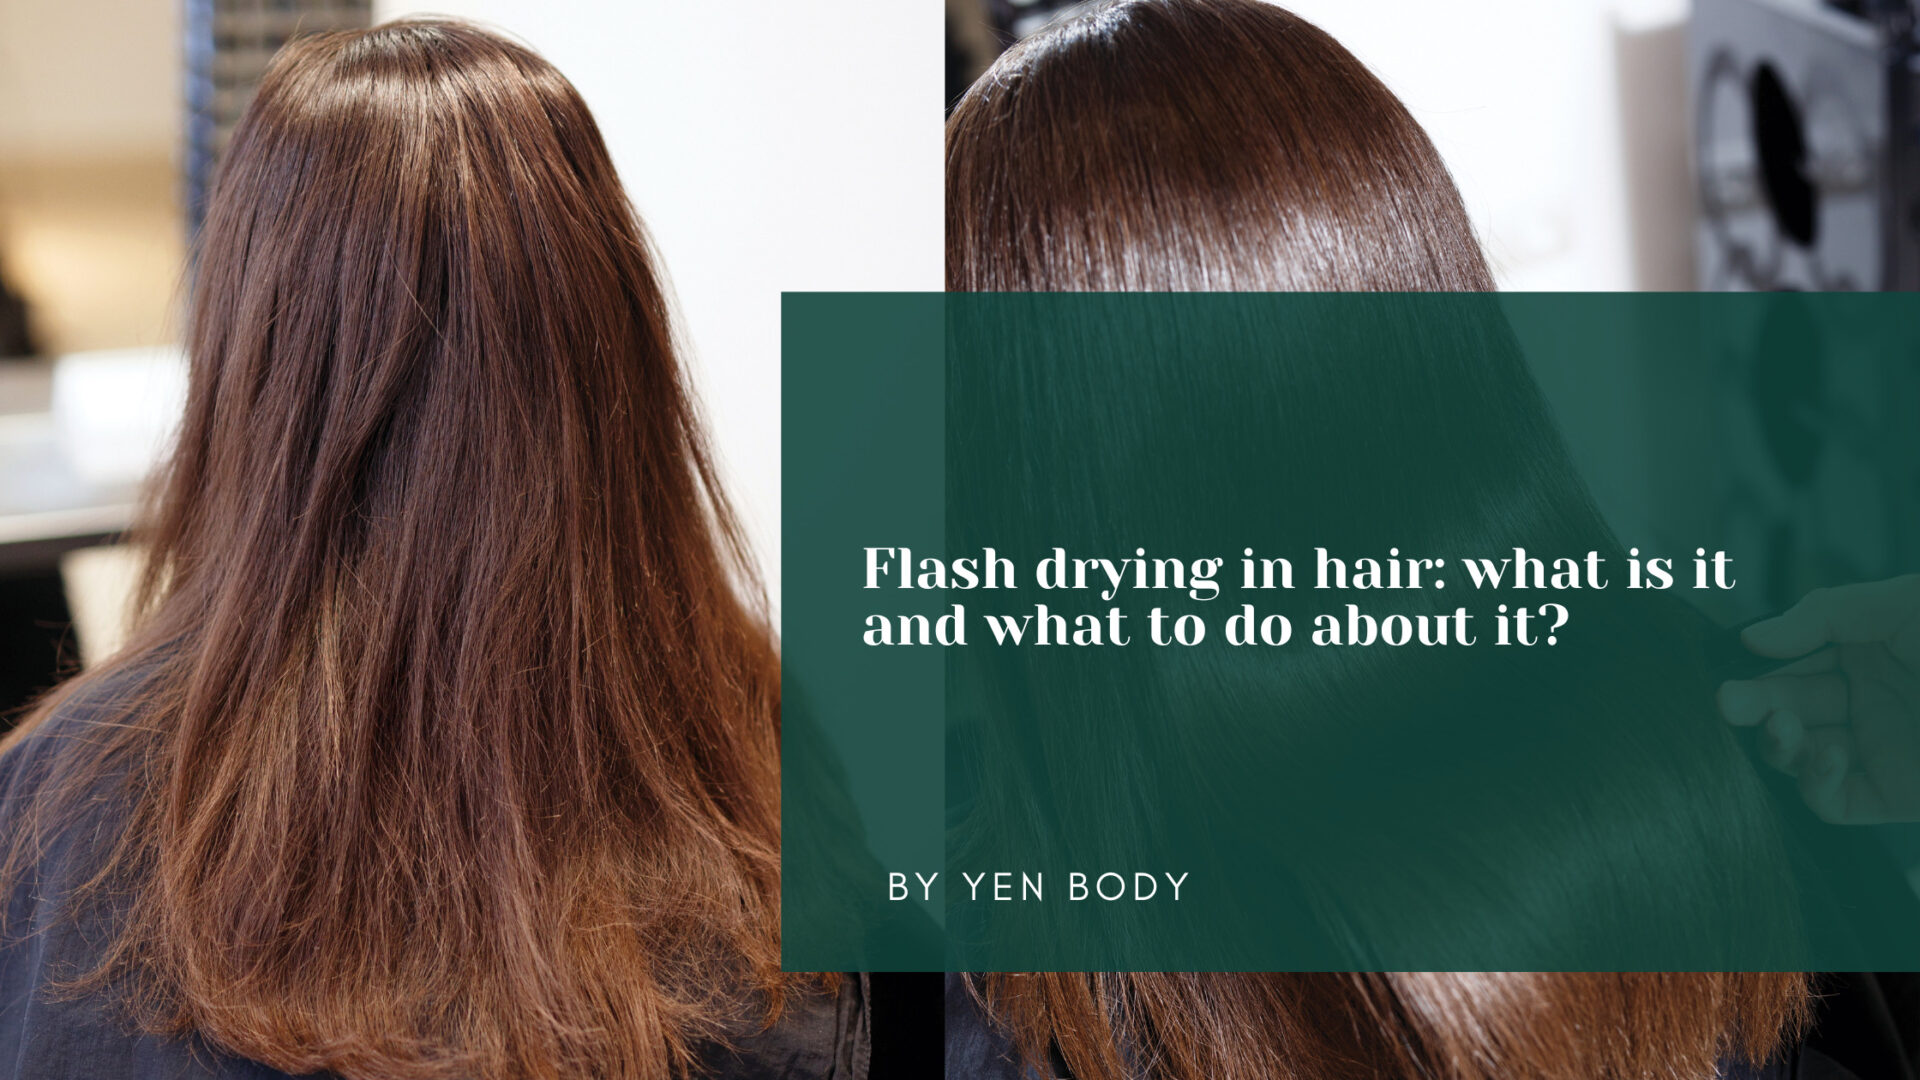 Flash drying in hair: what is it and what to do about it? 